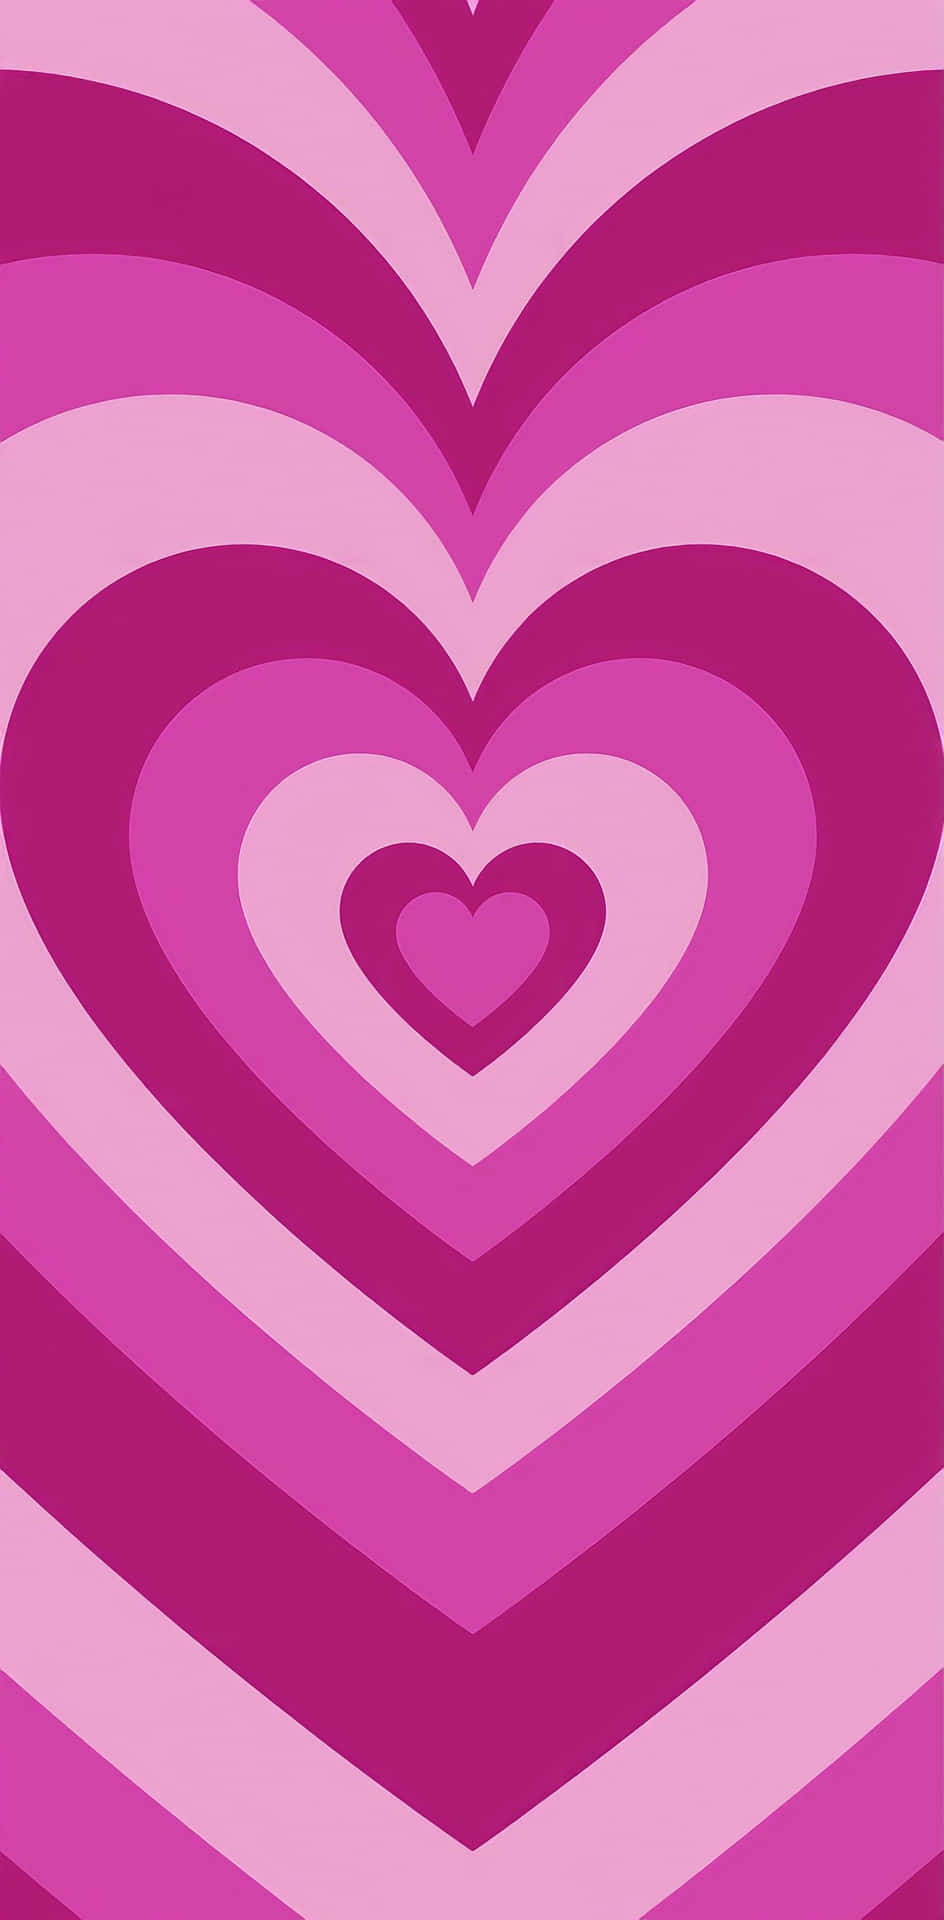 Spreading love and joy with glimmering pink hearts Wallpaper